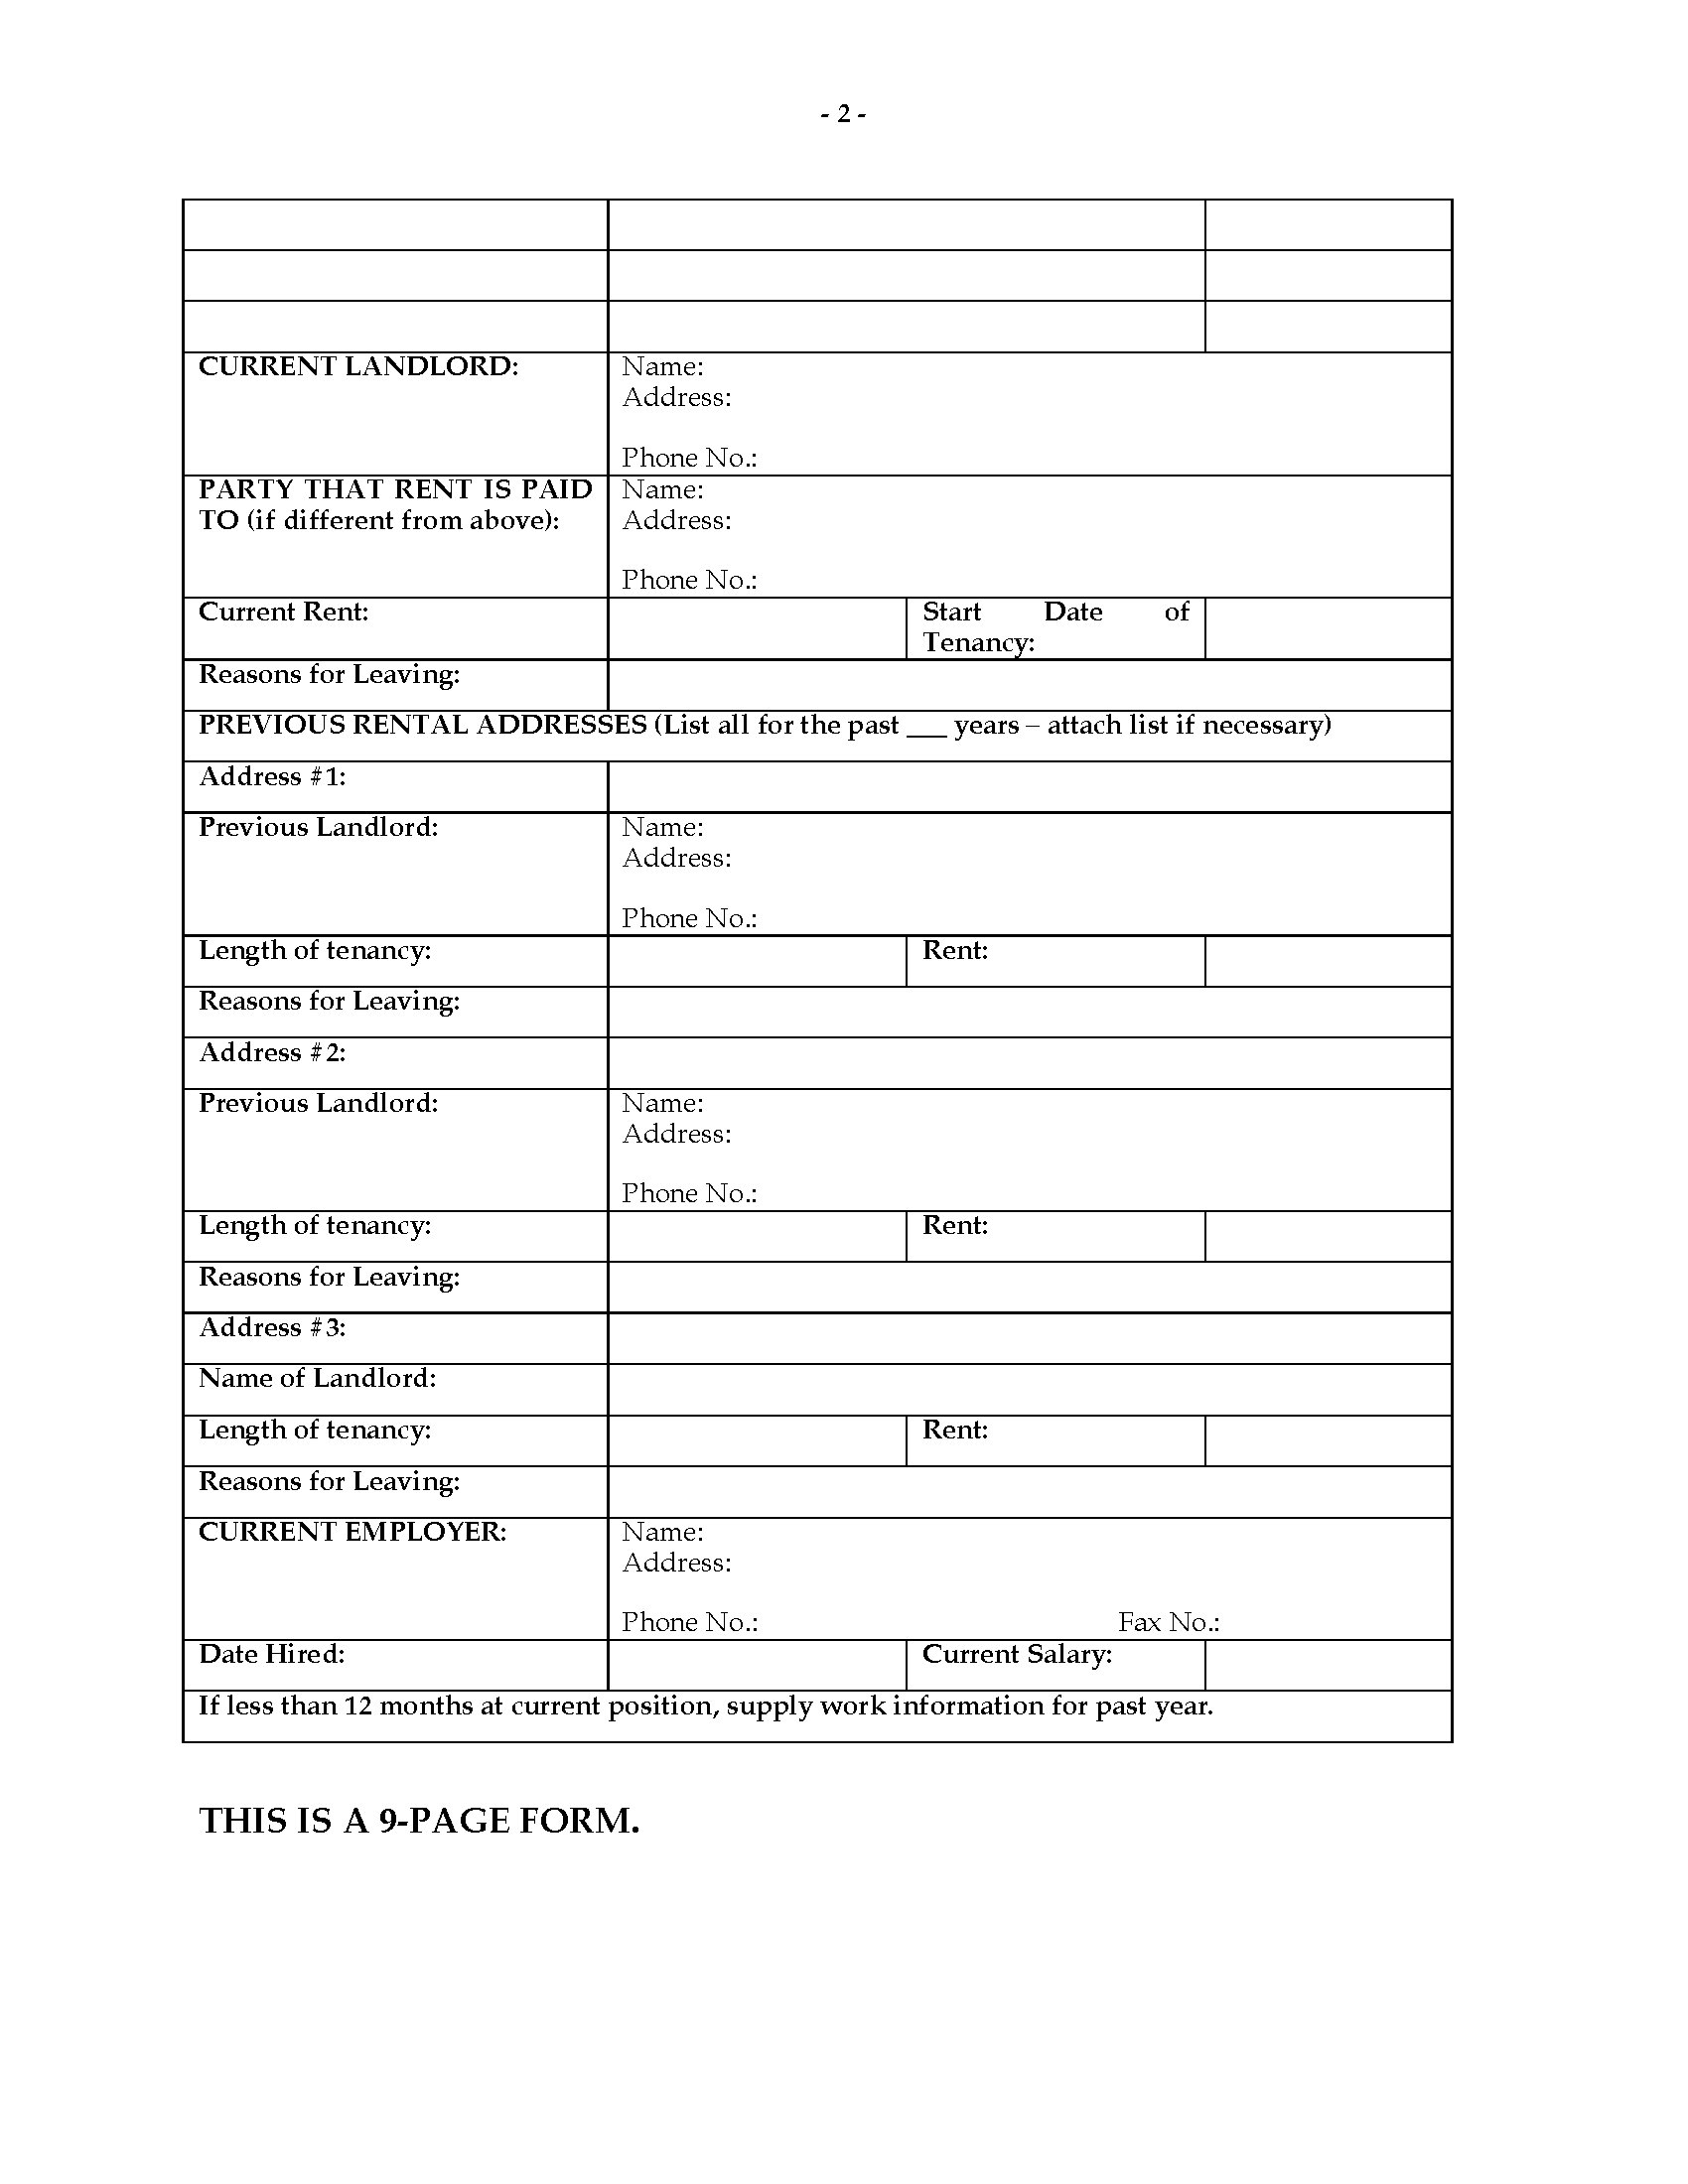 connecticut-rental-application-form-legal-forms-and-business